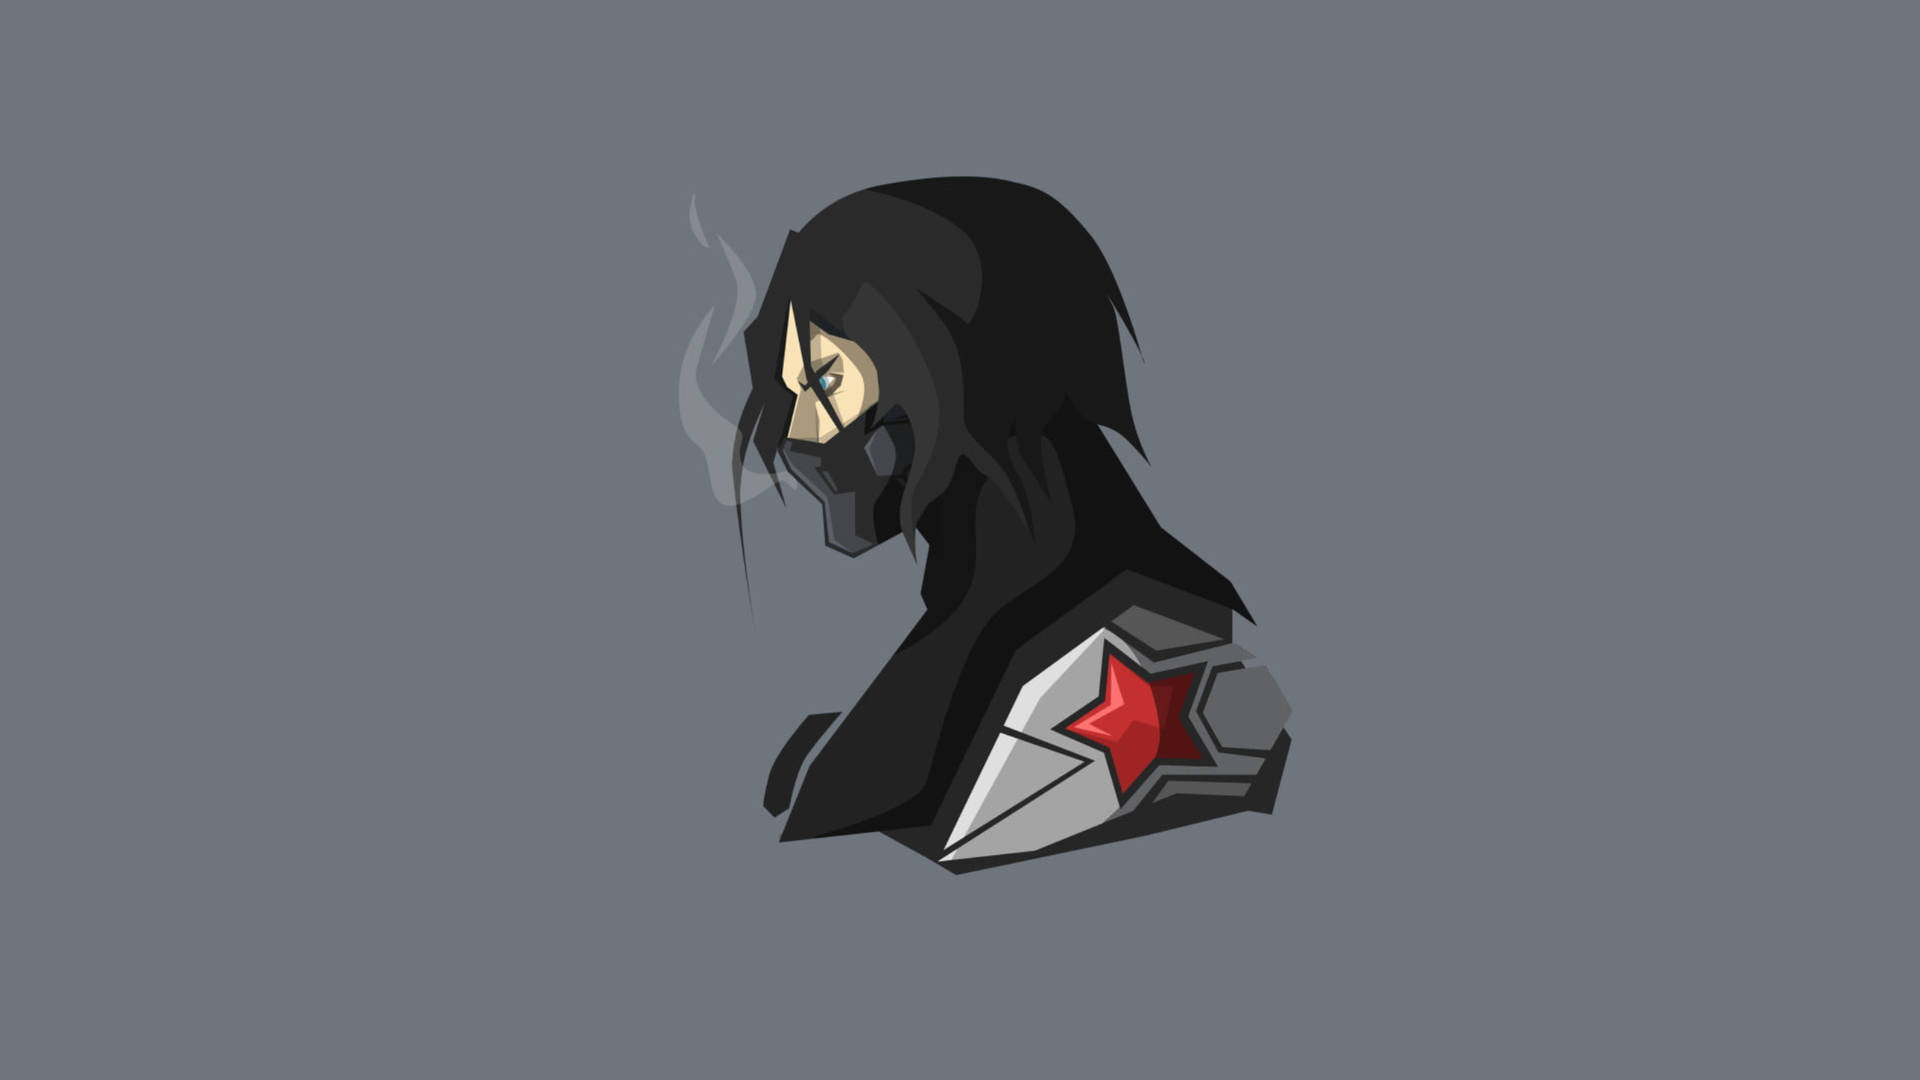 Anime Winter Soldier In Gray Background